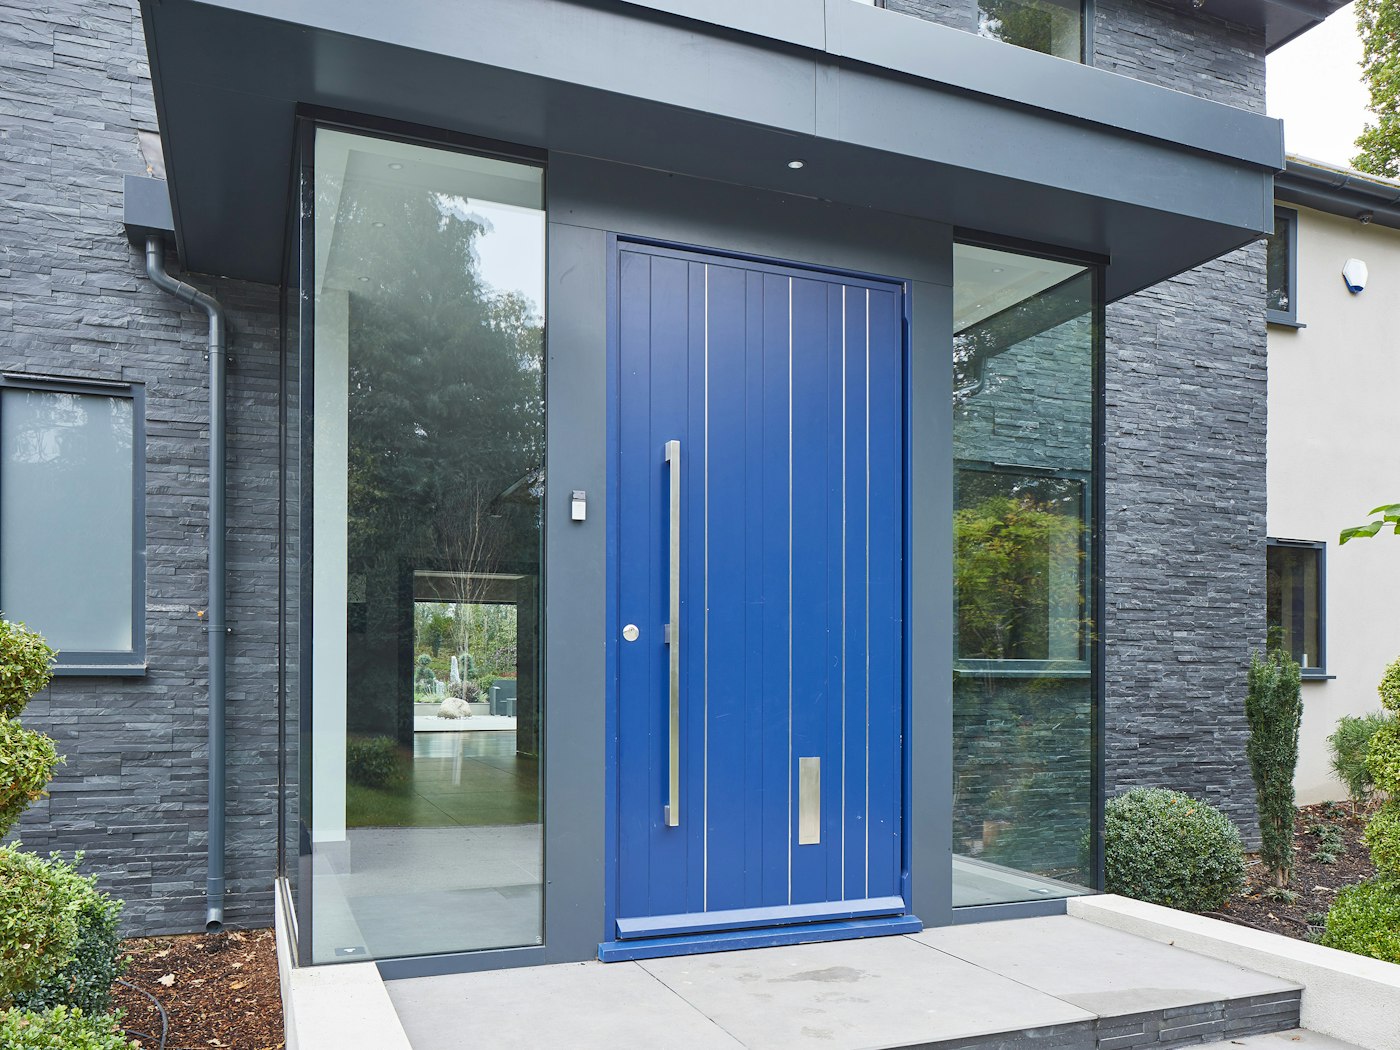 this glass box entrance certainly creates an attractive result